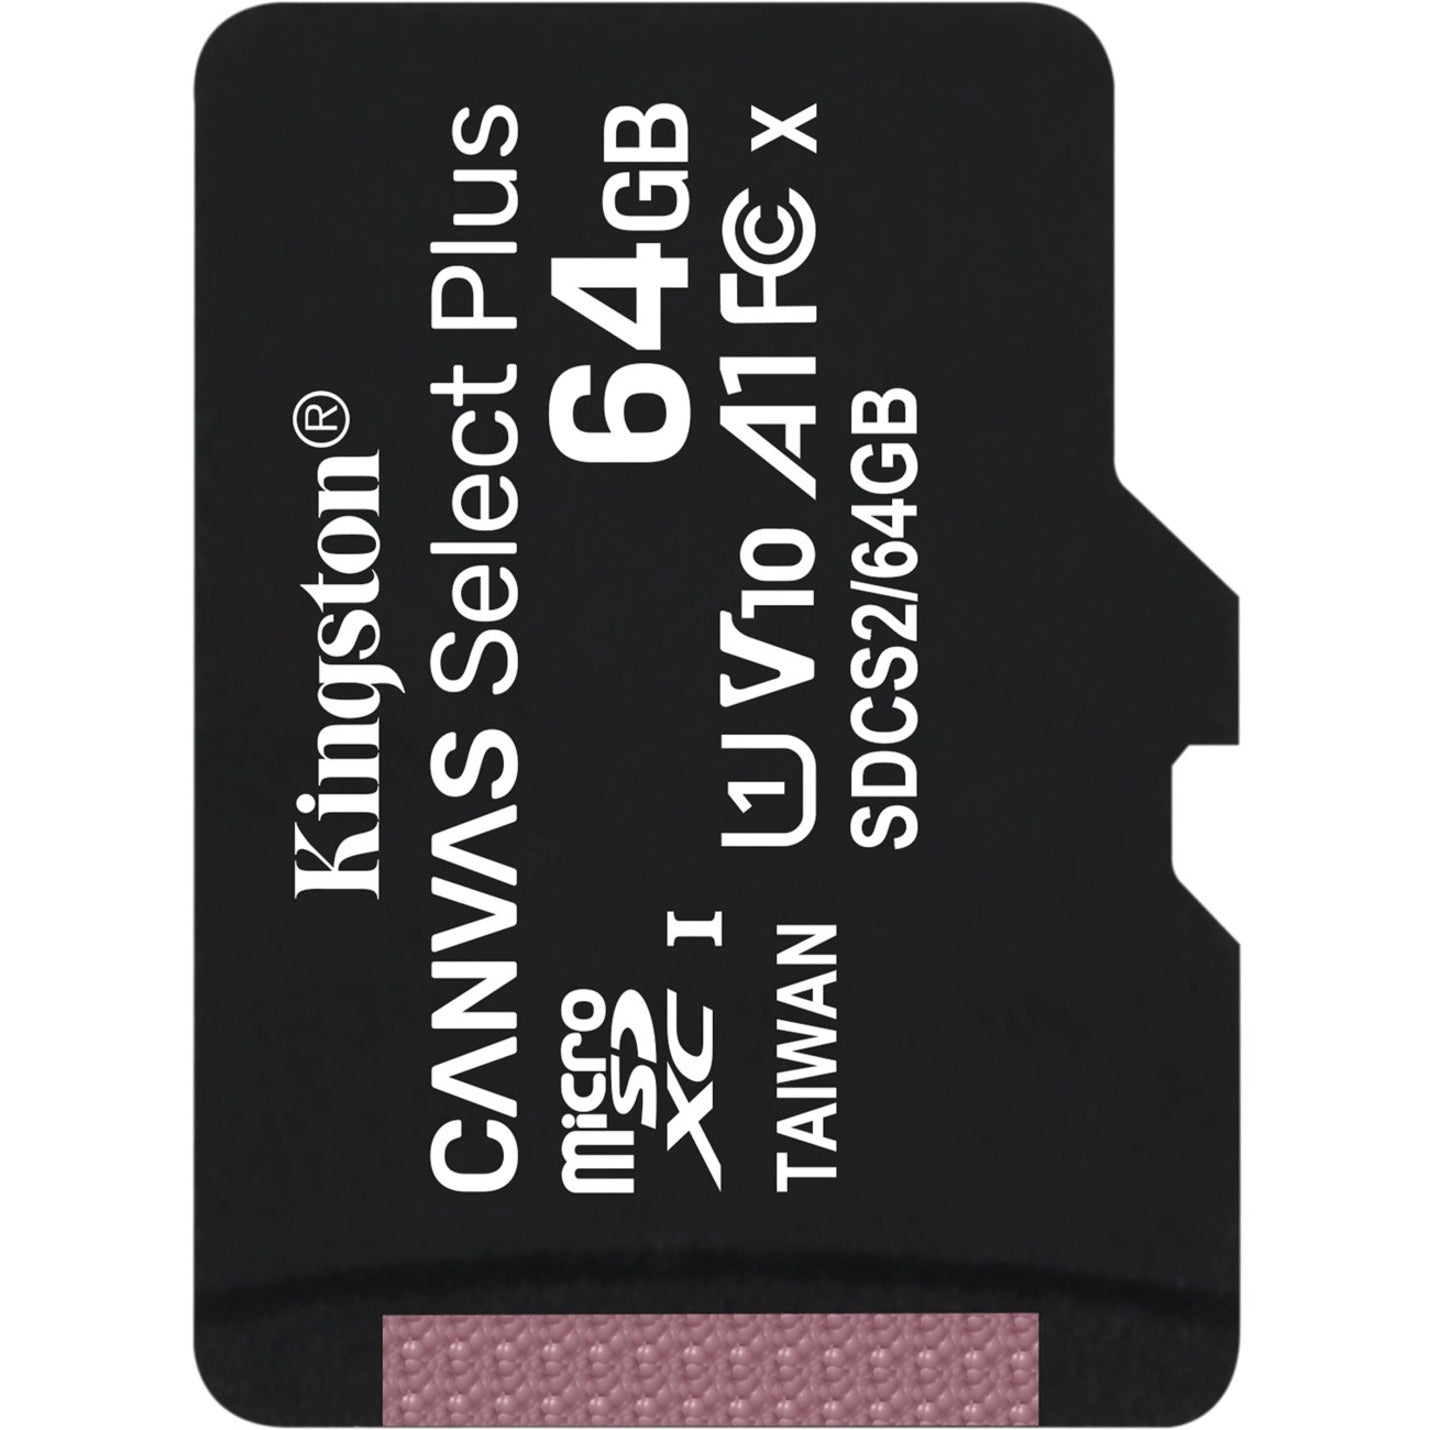 Kingston SDCS2/64GBSP Canvas Select Plus microSD Card With Android A1 Performance Class, 64GB Storage Capacity, 100 MB/s Read Speed, Class 10/UHS-I (U1)